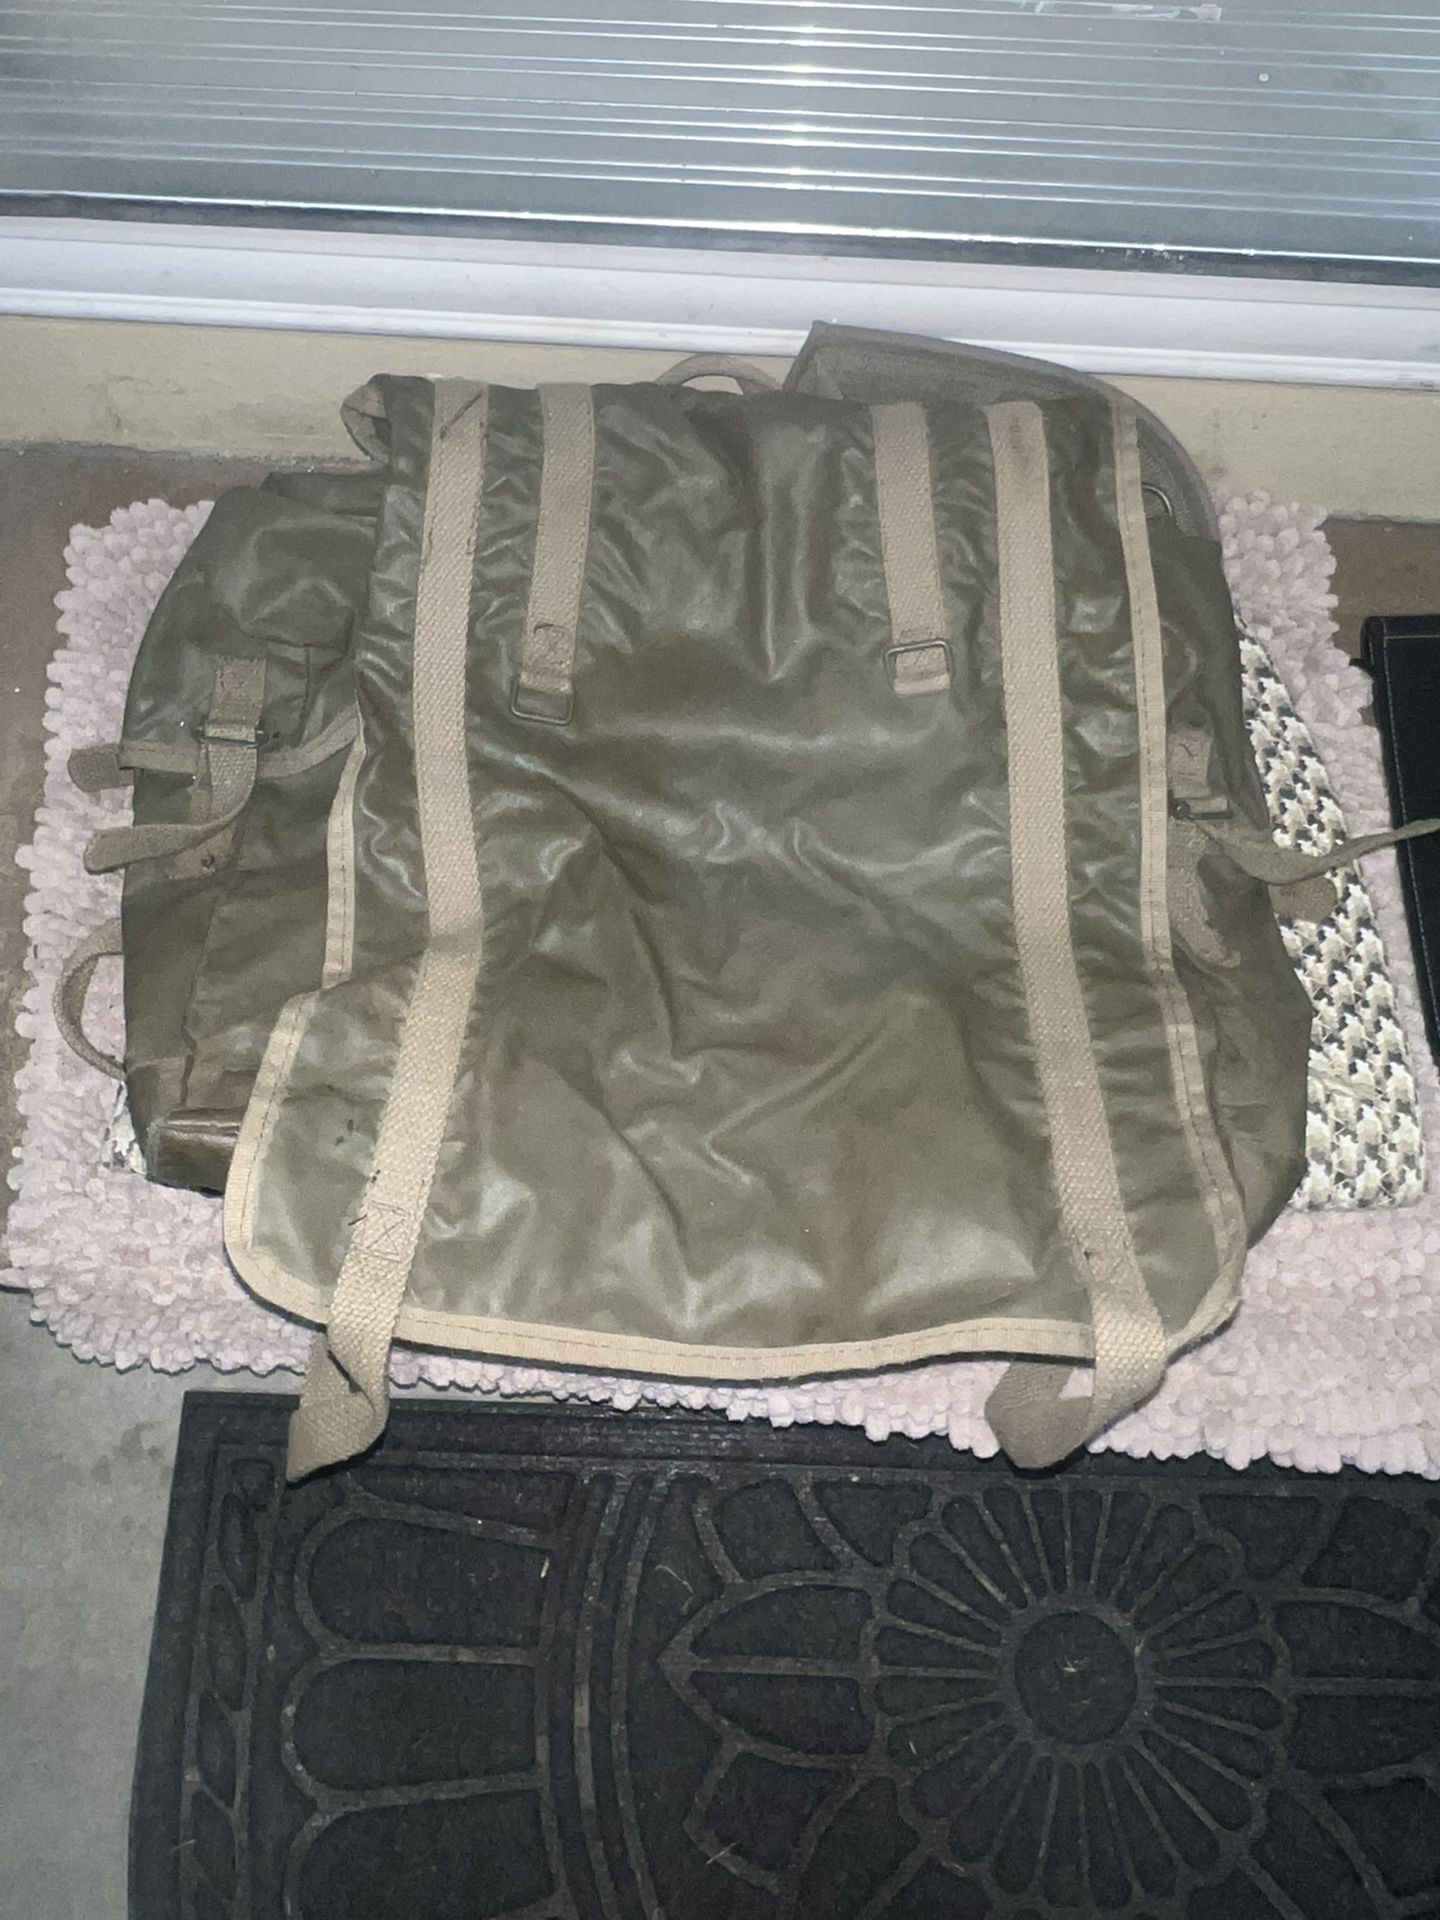 Military Multi-pouch Canvas Over-flap Backpack